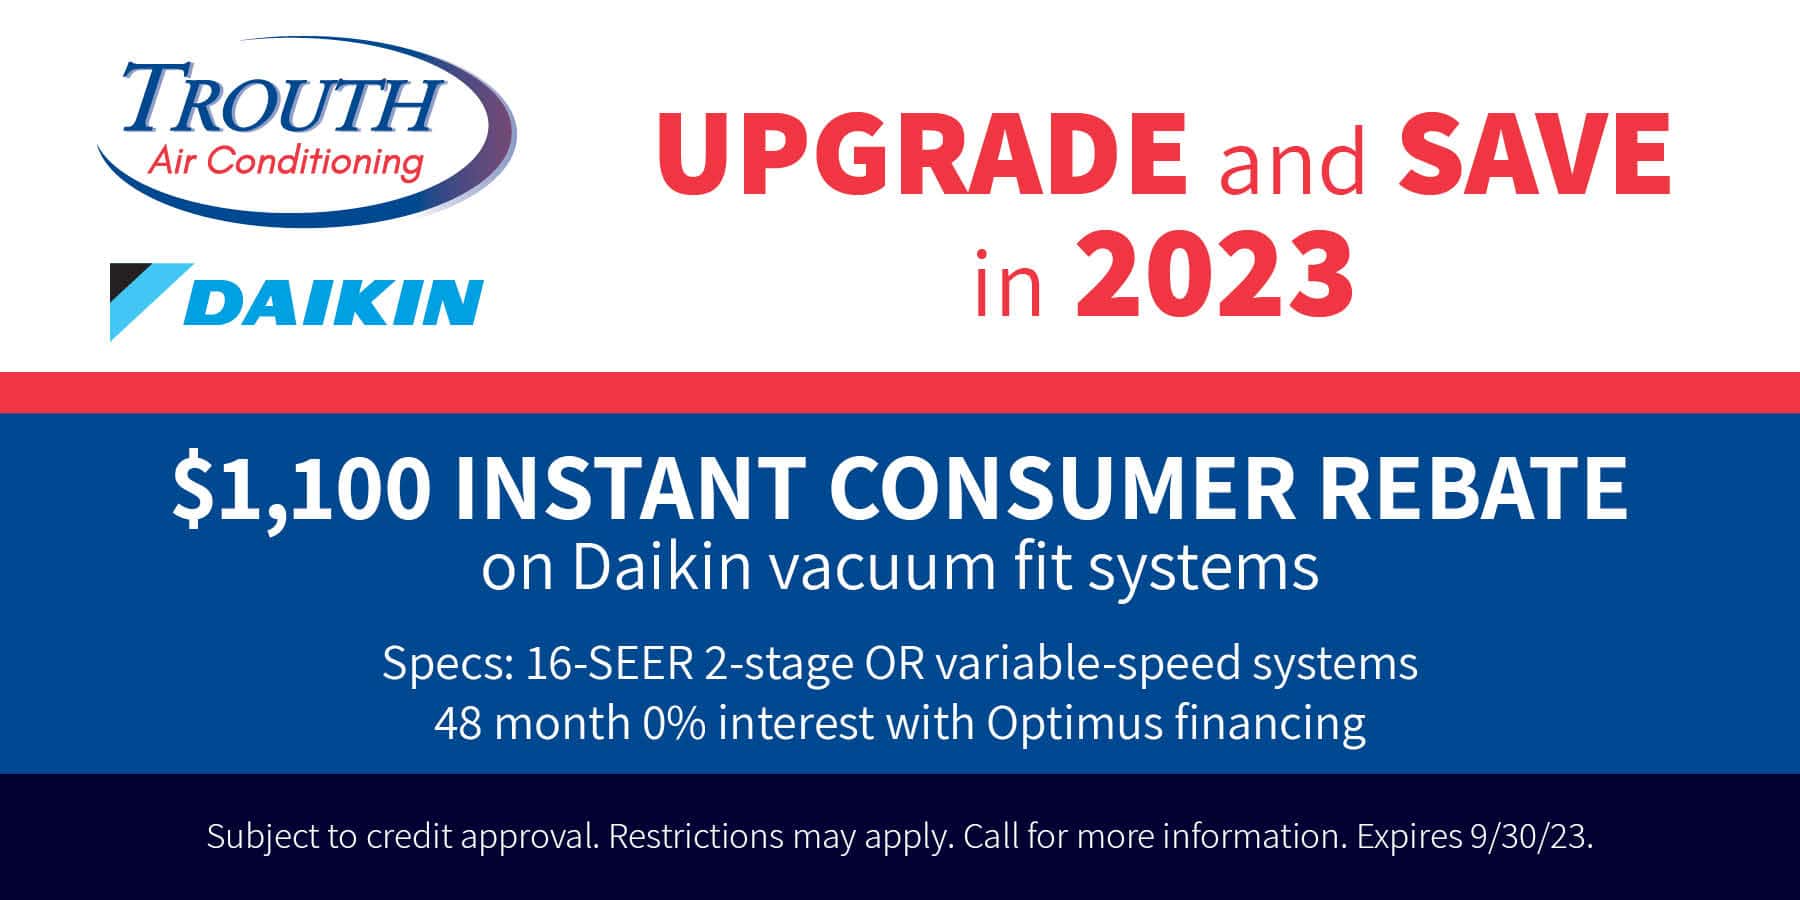 Trouth Coupon to Upgrade and Save in 2023 offering $1,100 instant rebate on Daikin 2-speed and Variable-speed systems